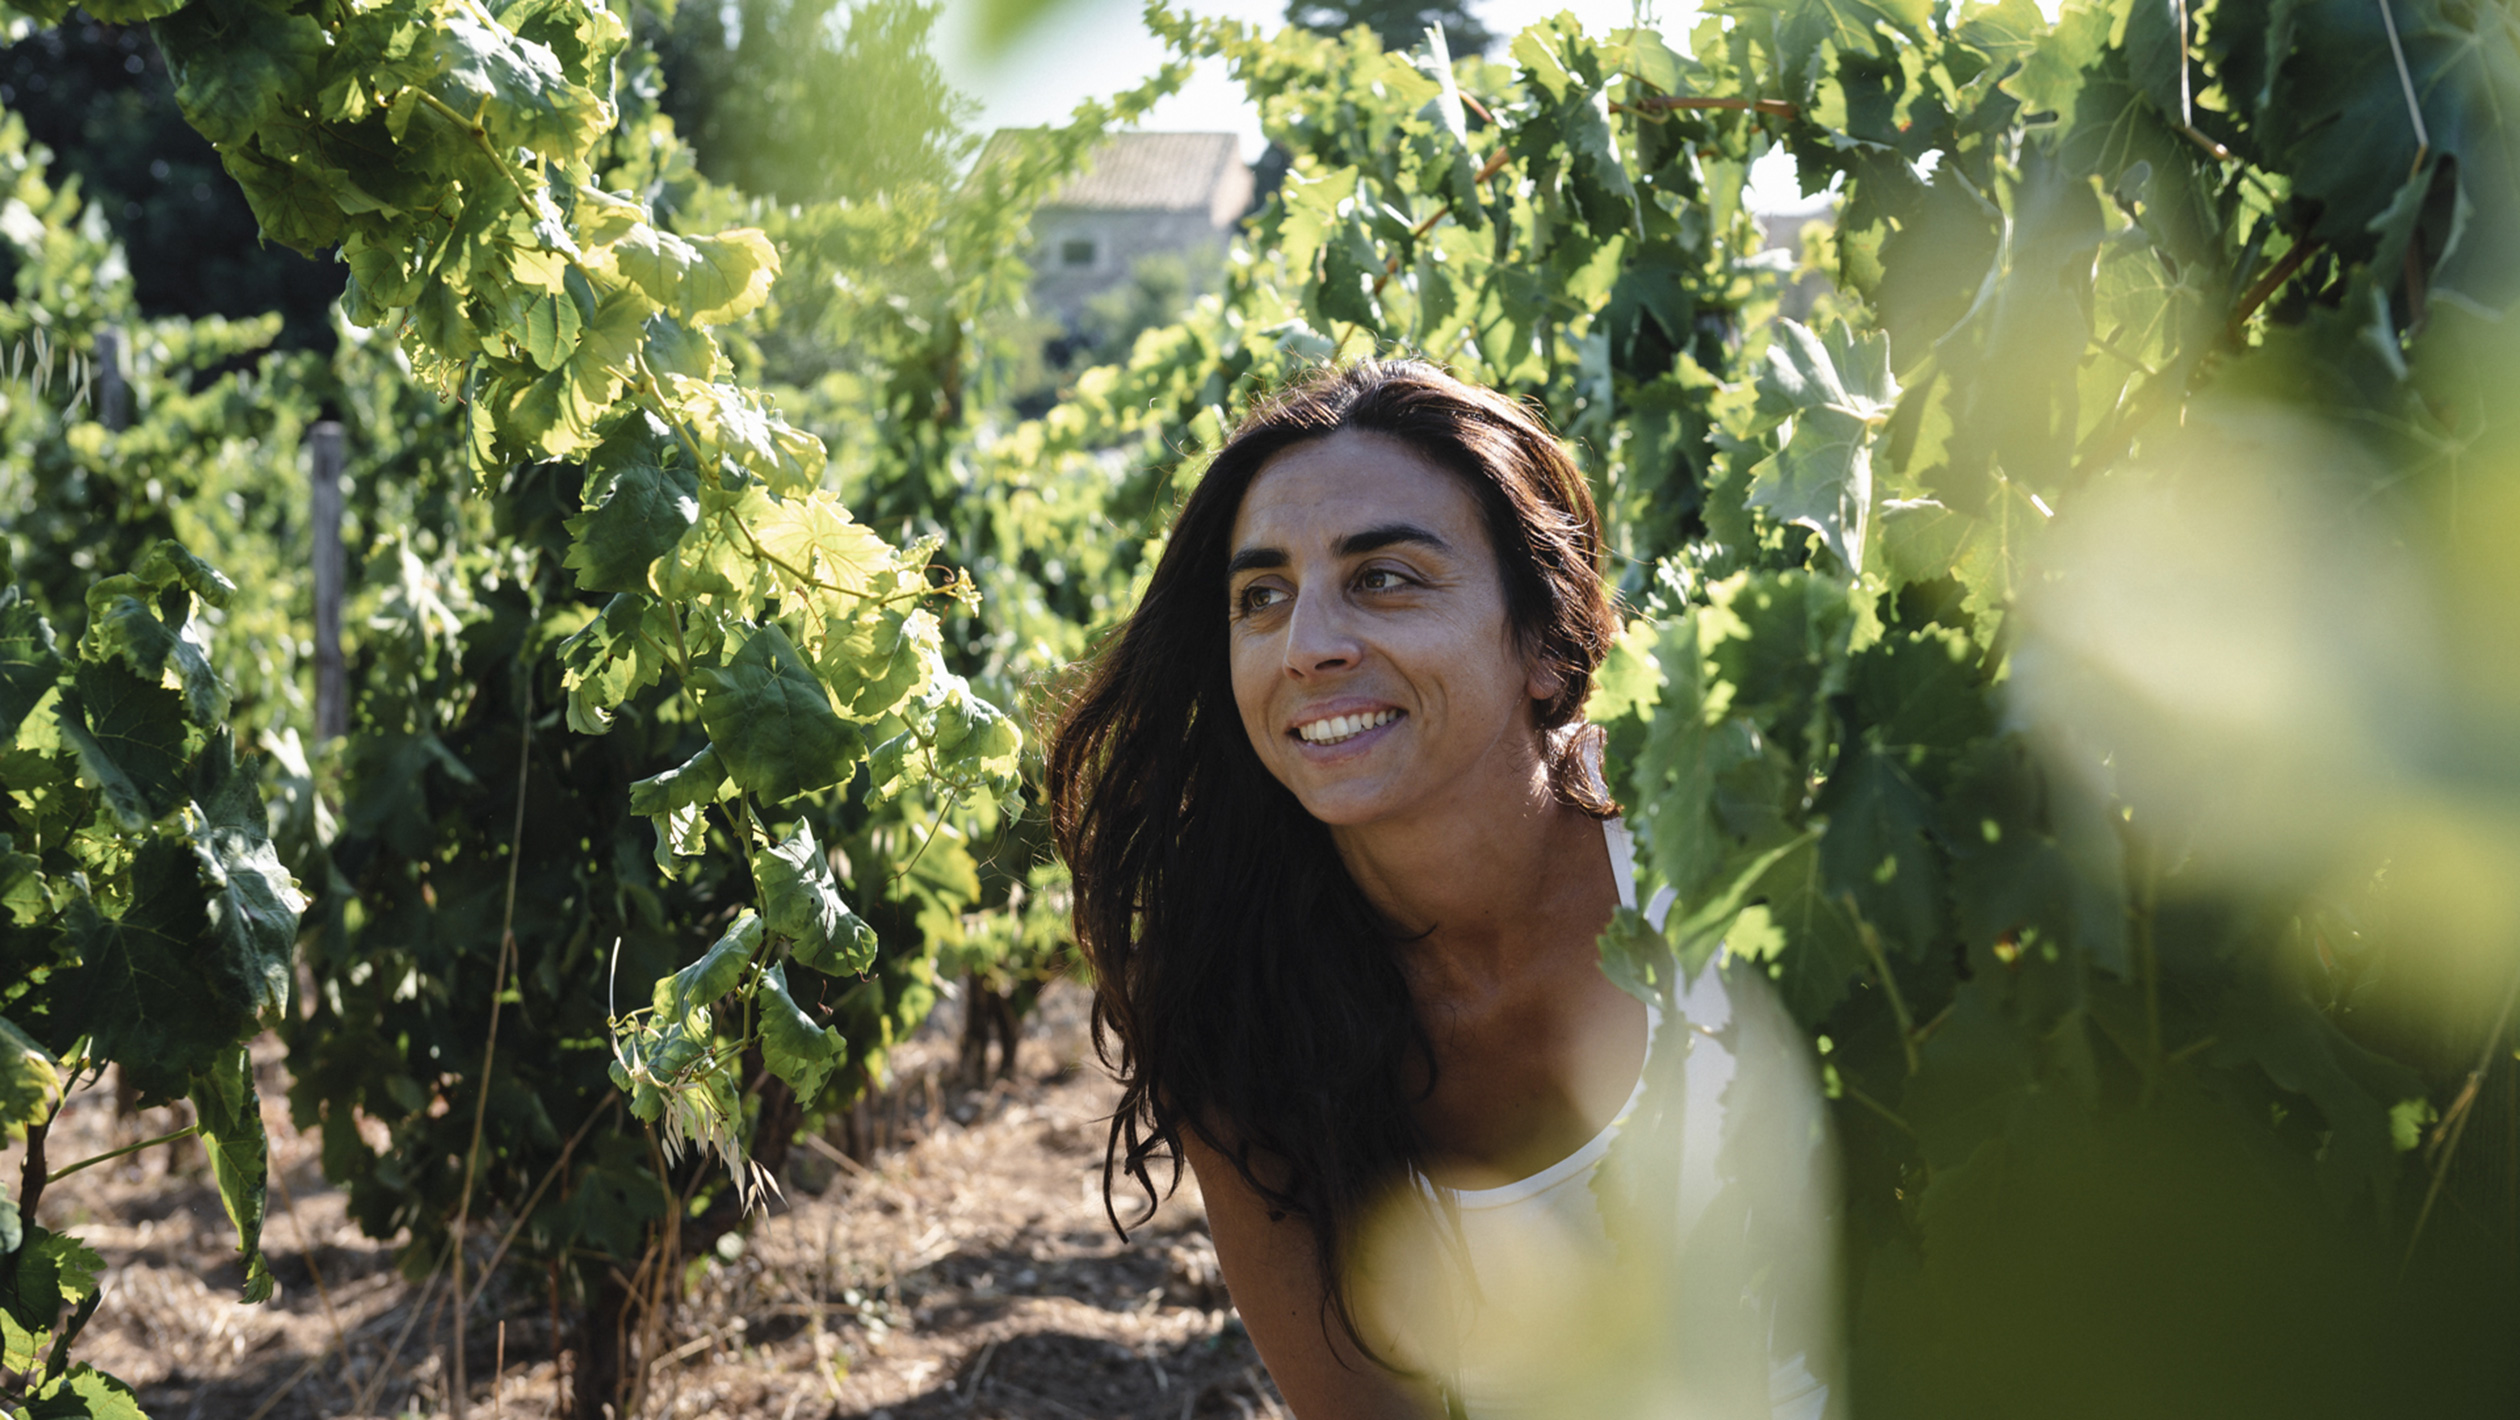 Arianna Occhipinti poses amongst the vines of a vineyard on a sunny day